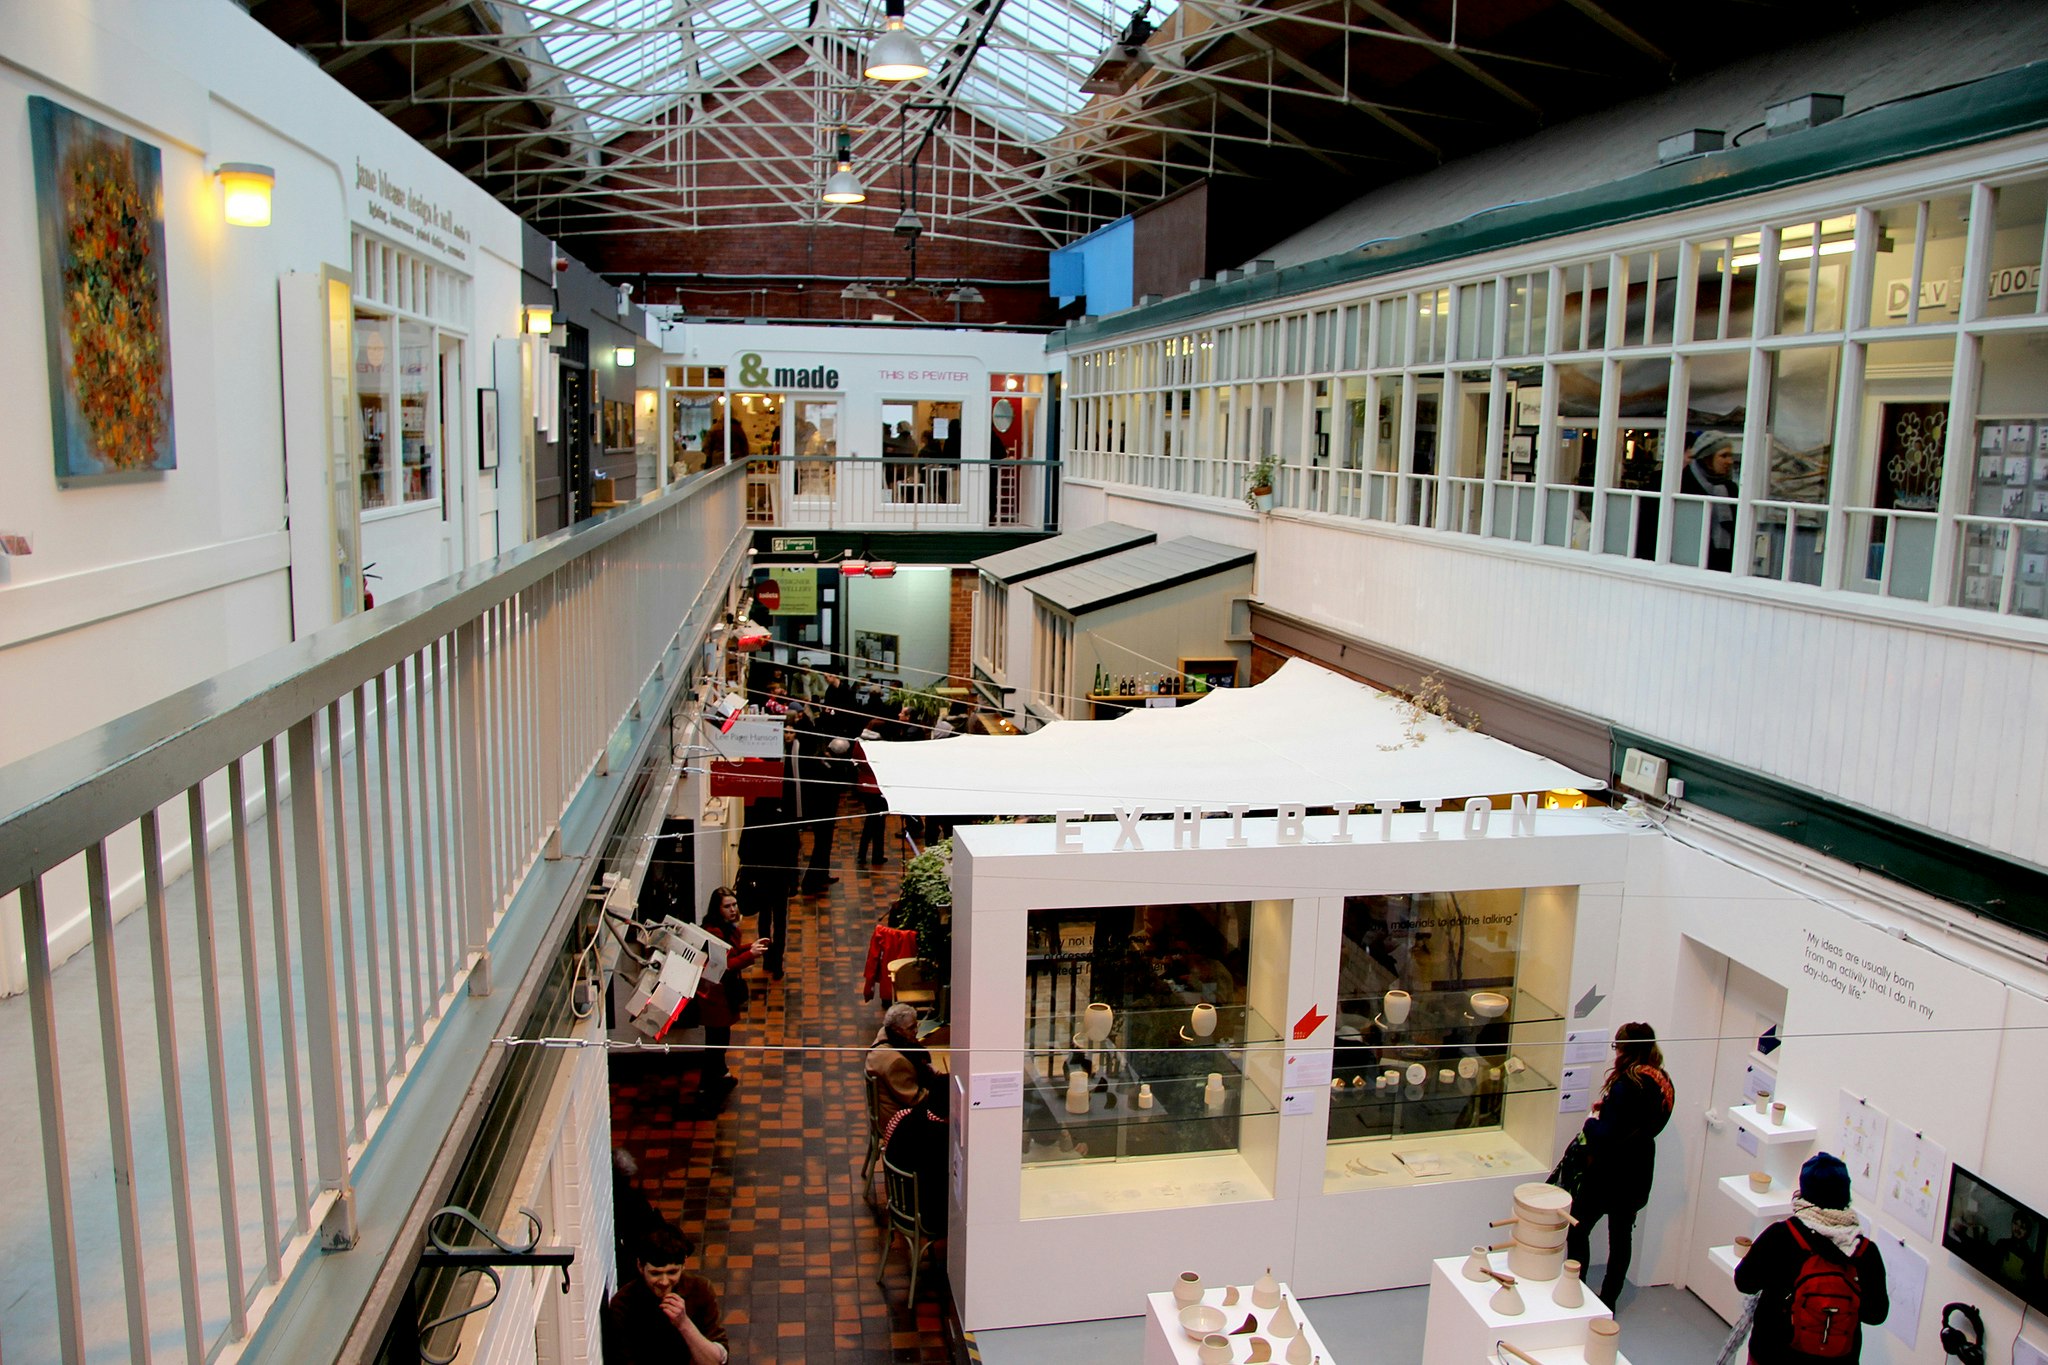 Memorable Wedding Venues in Manchester - Manchester Craft and Design Centre